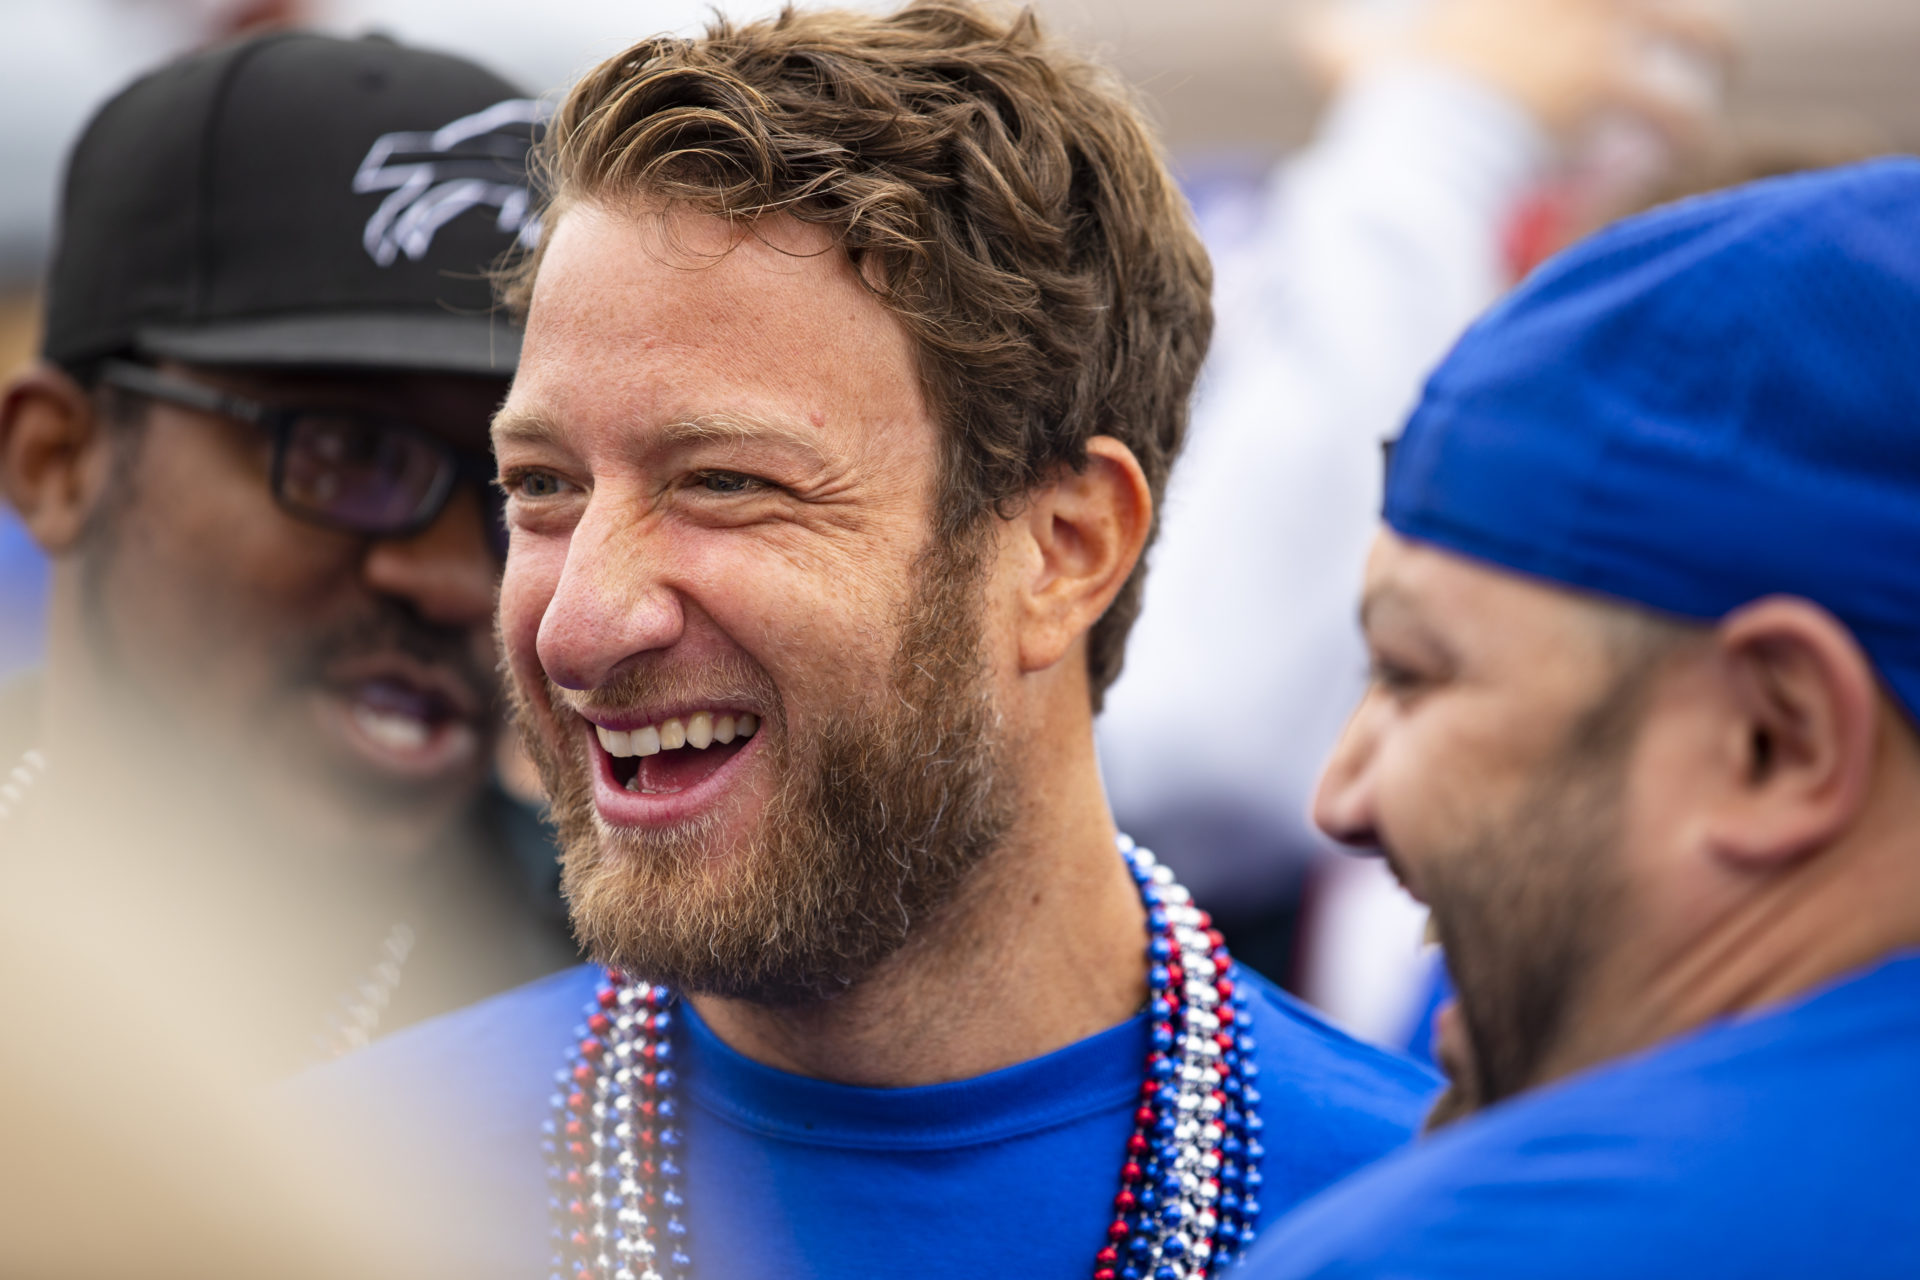 Barstool's Dave Portnoy calls his hair surgery 'the price of great hair'